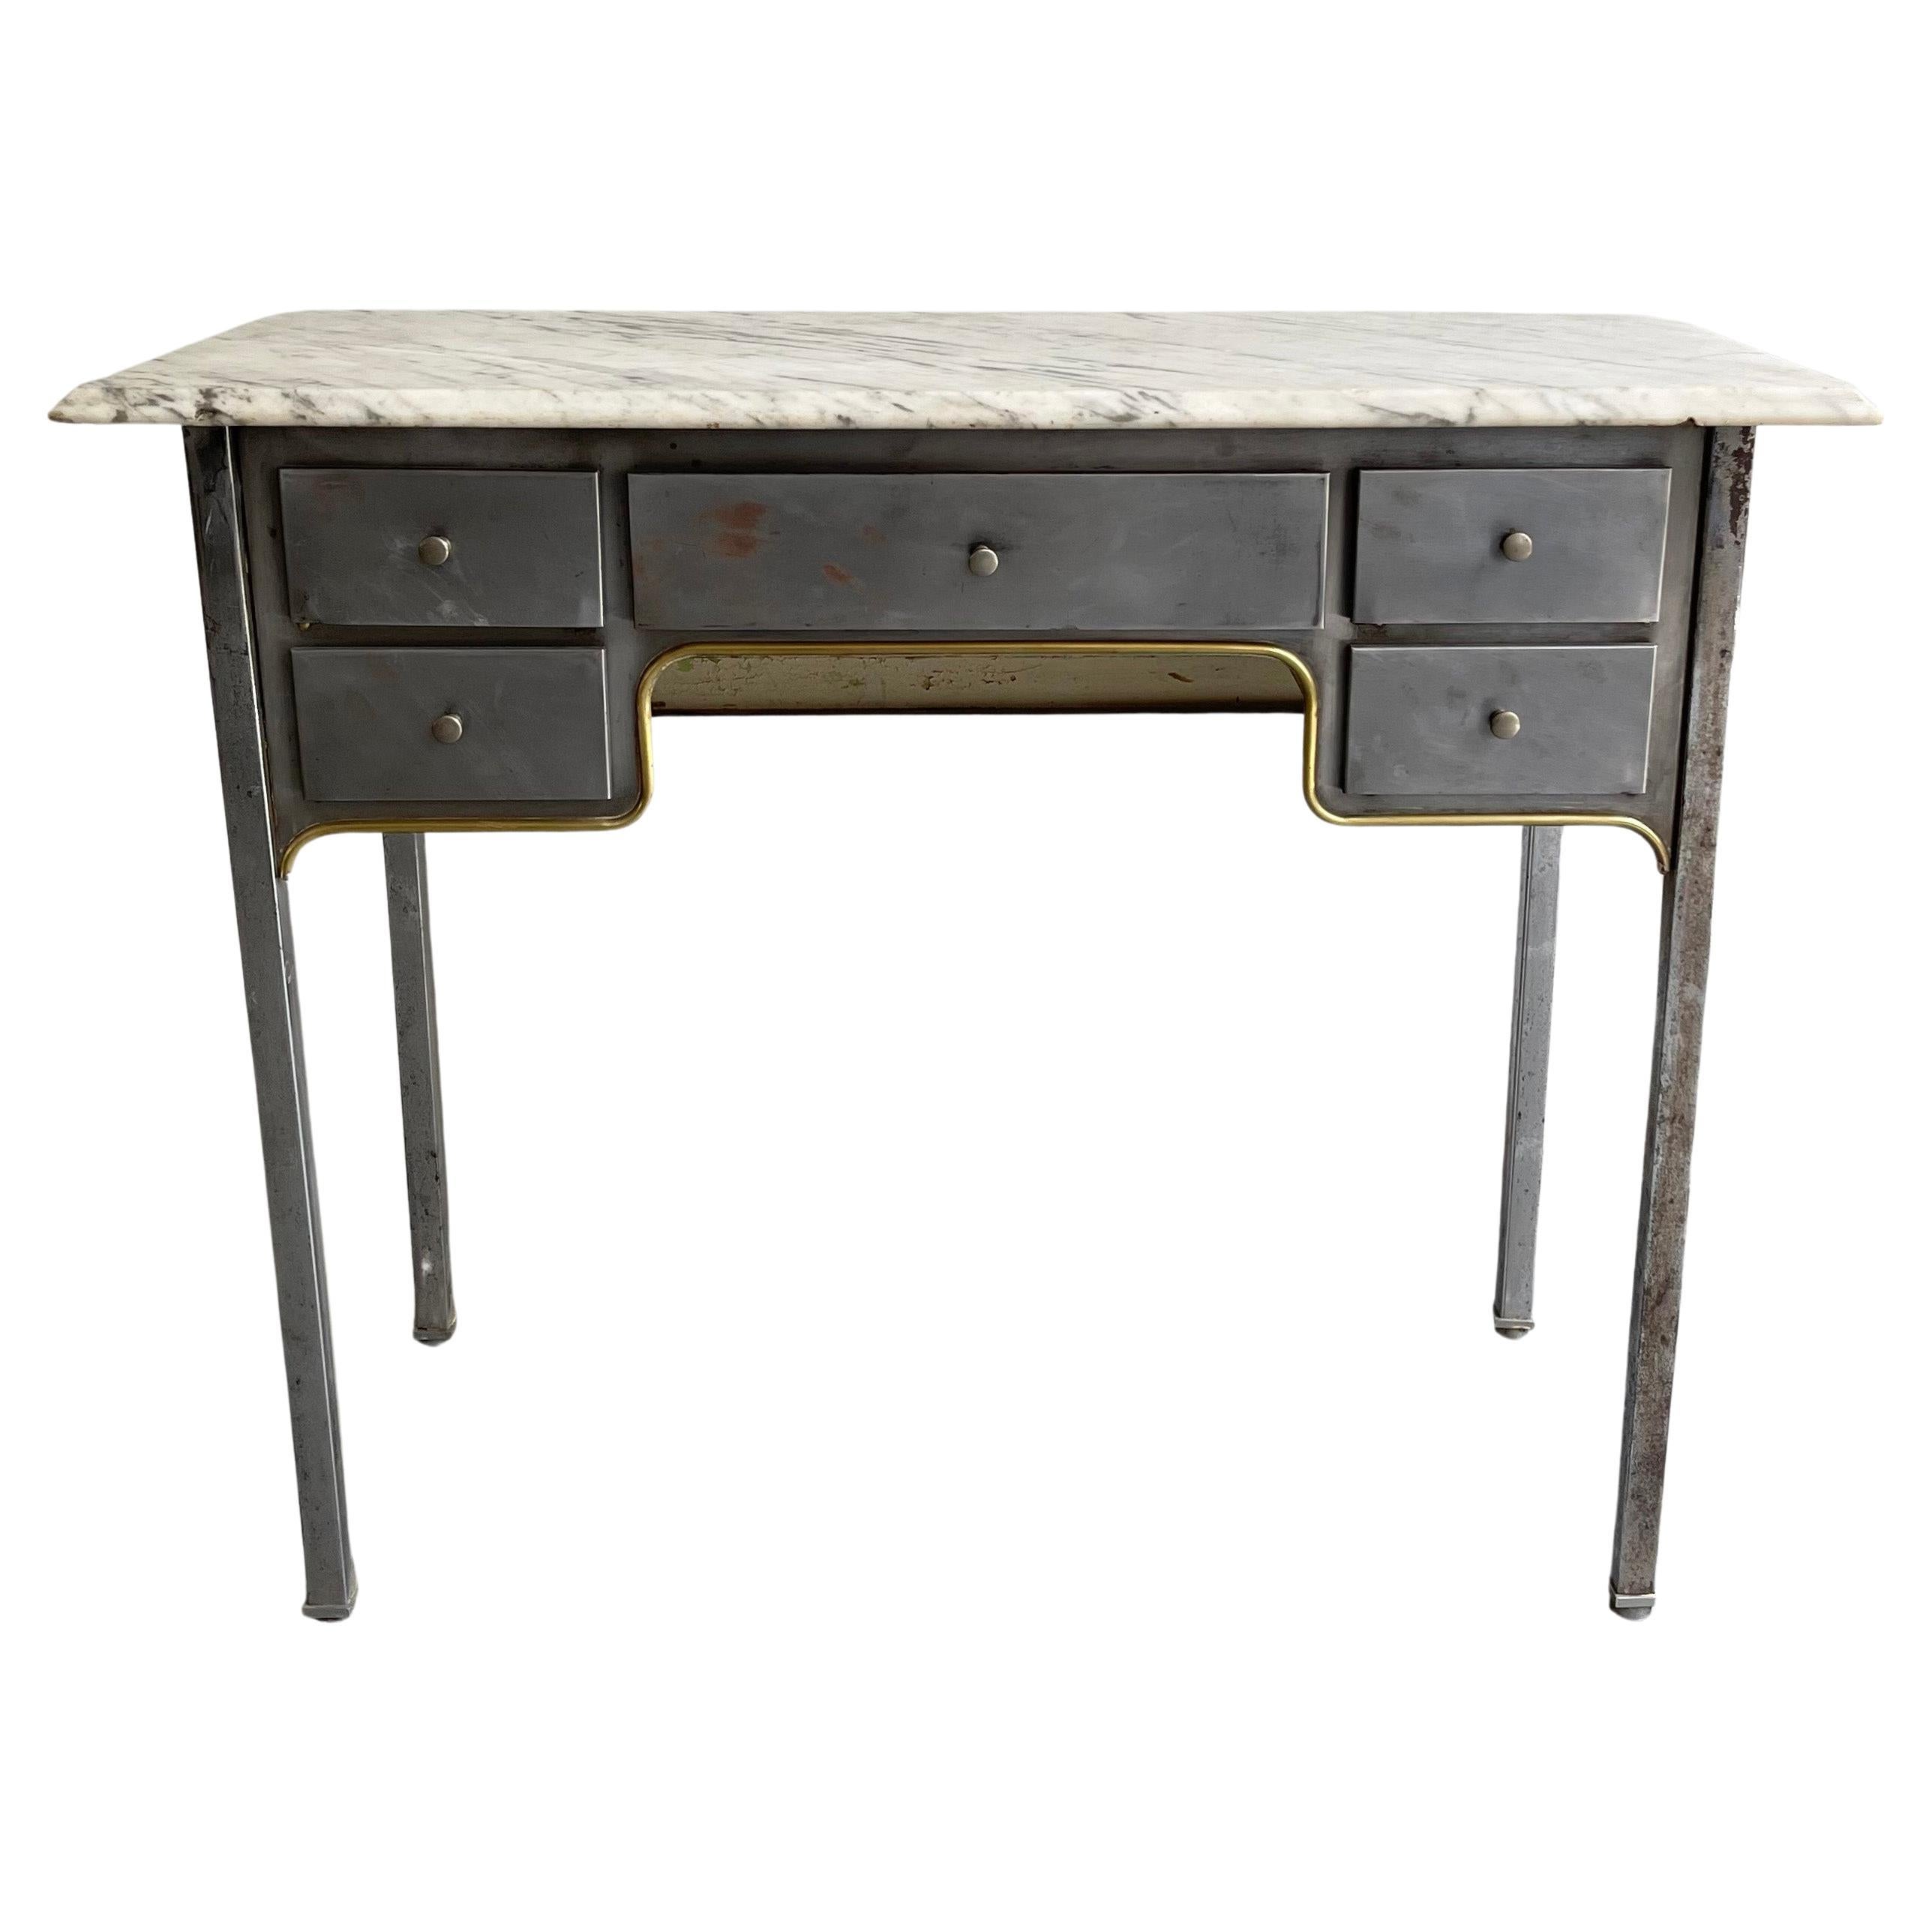 Early 20th Century Brushed Steel And Marble Writing Desk Vanity For Sale